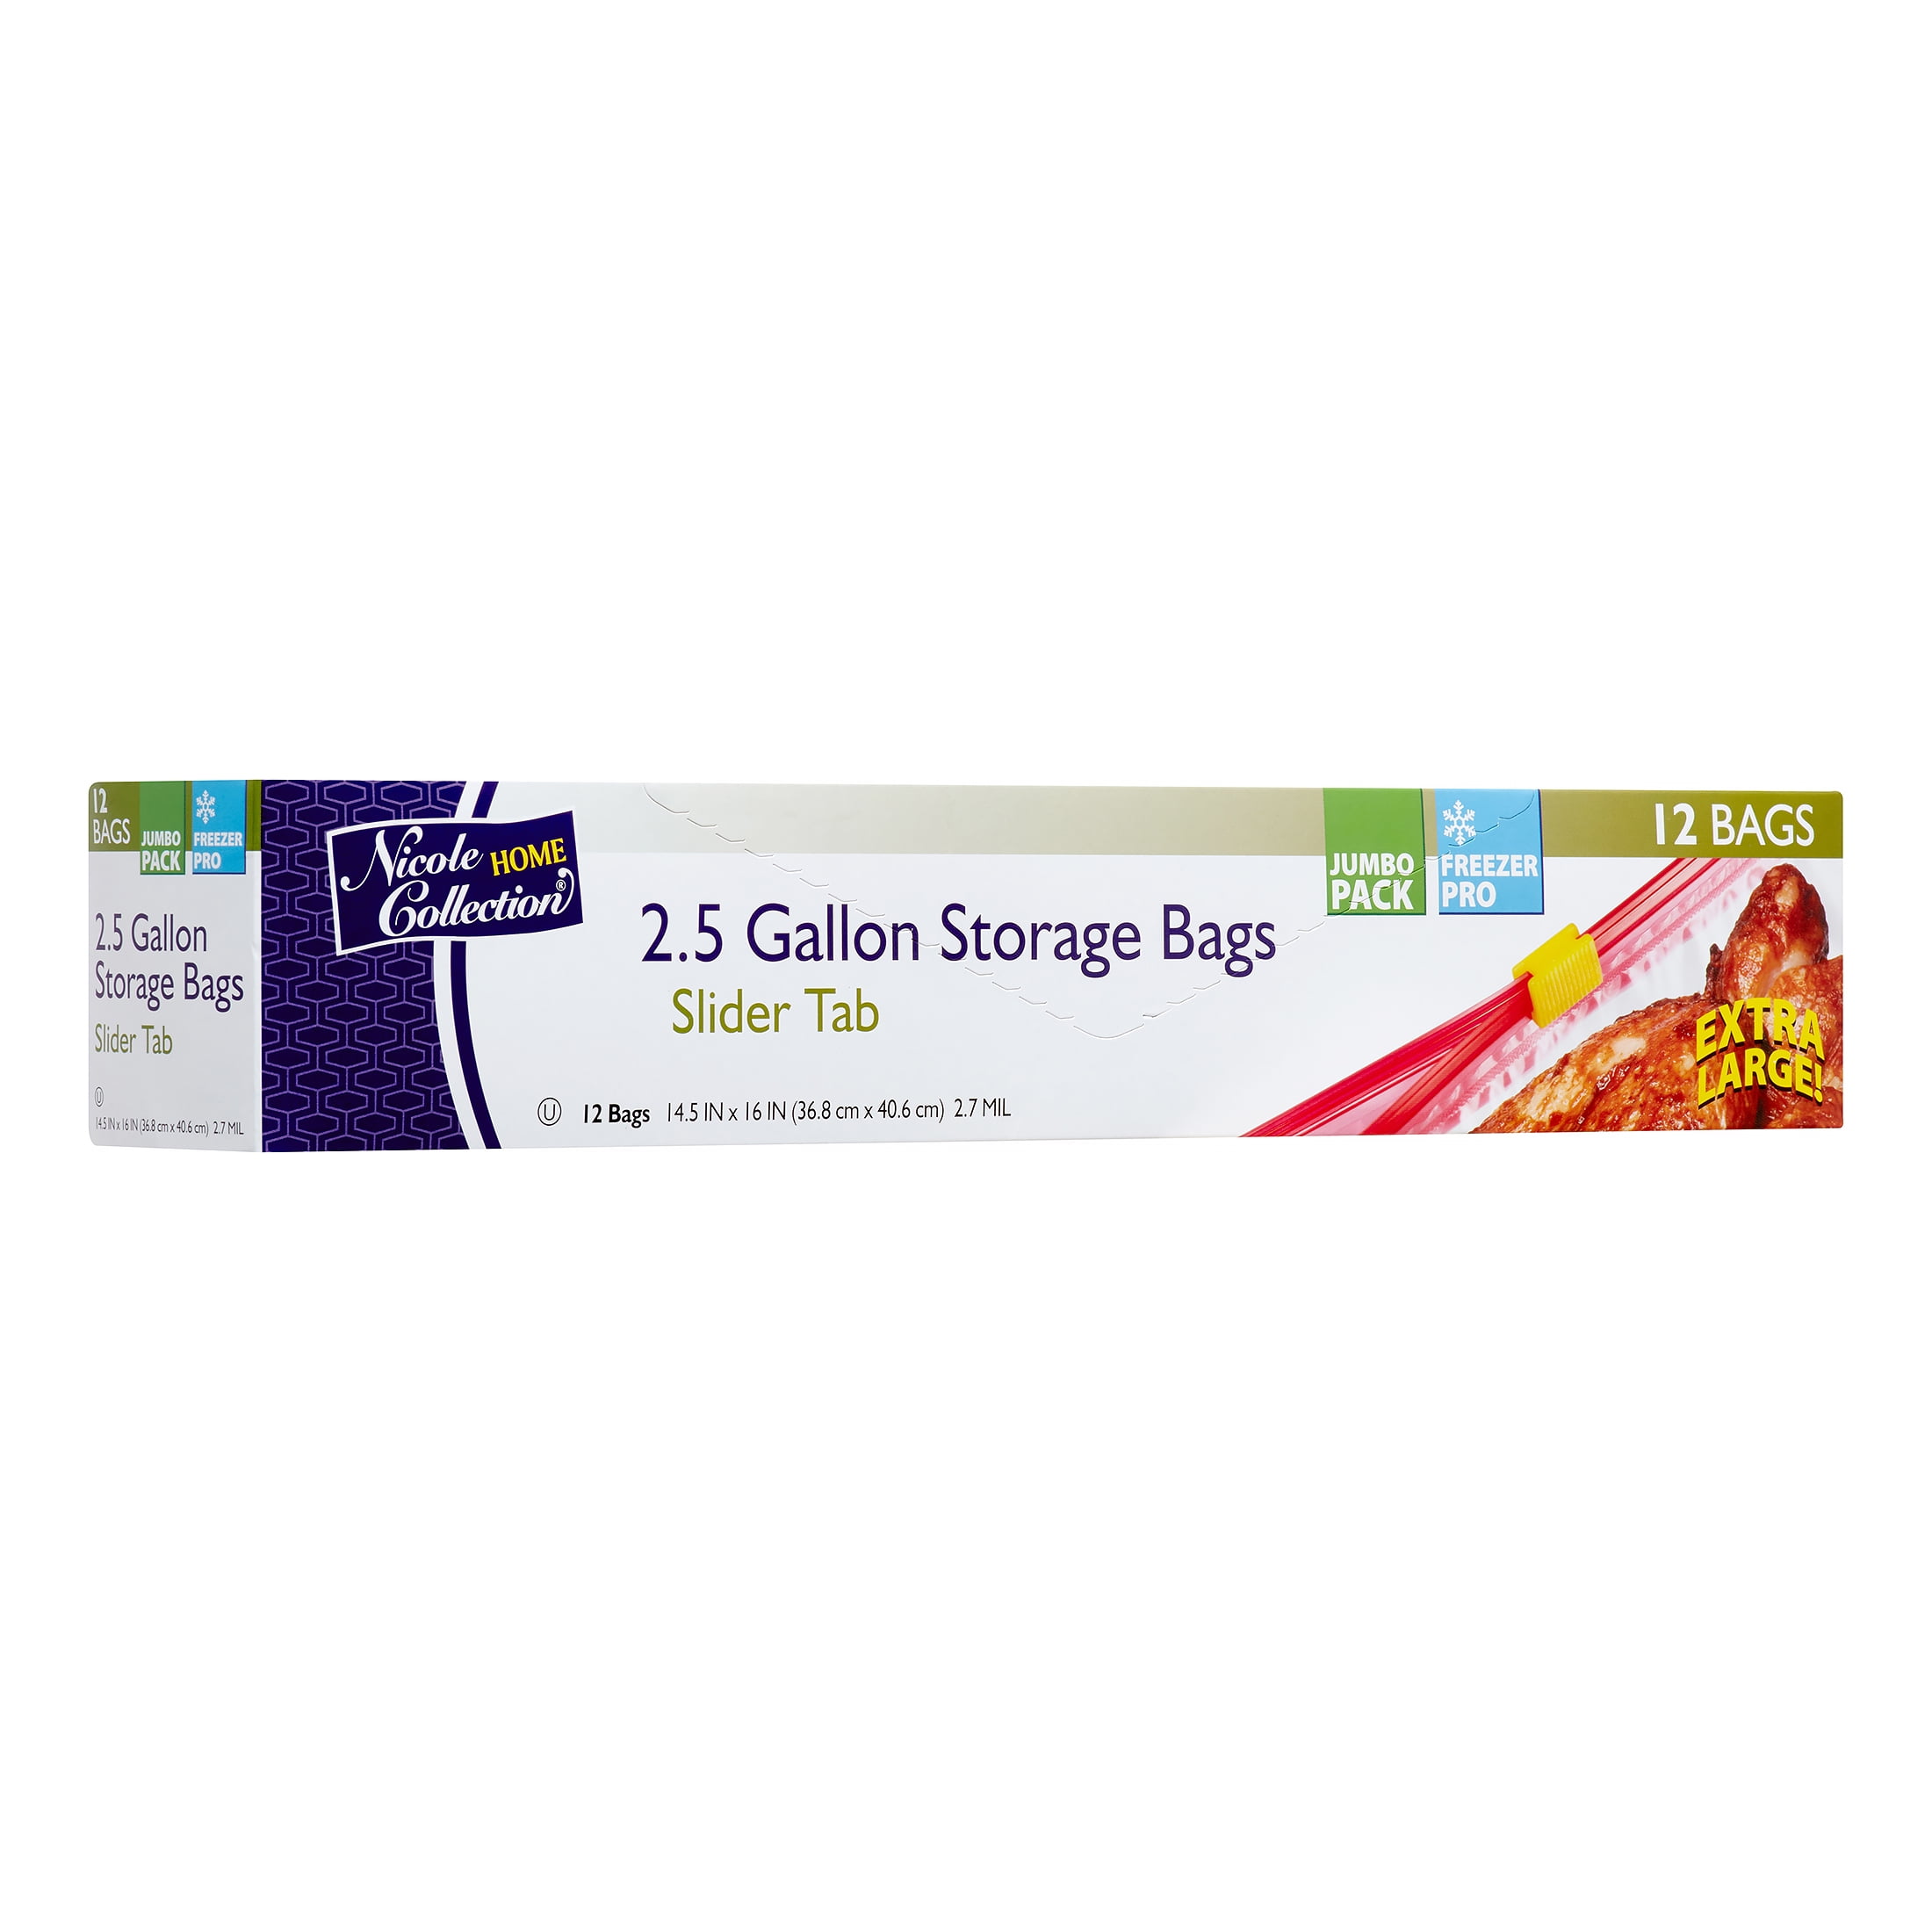 Nicole Home Collection Zip Seal Portion Control Bags – Snack Size – 6 Packs  240 Bags Total